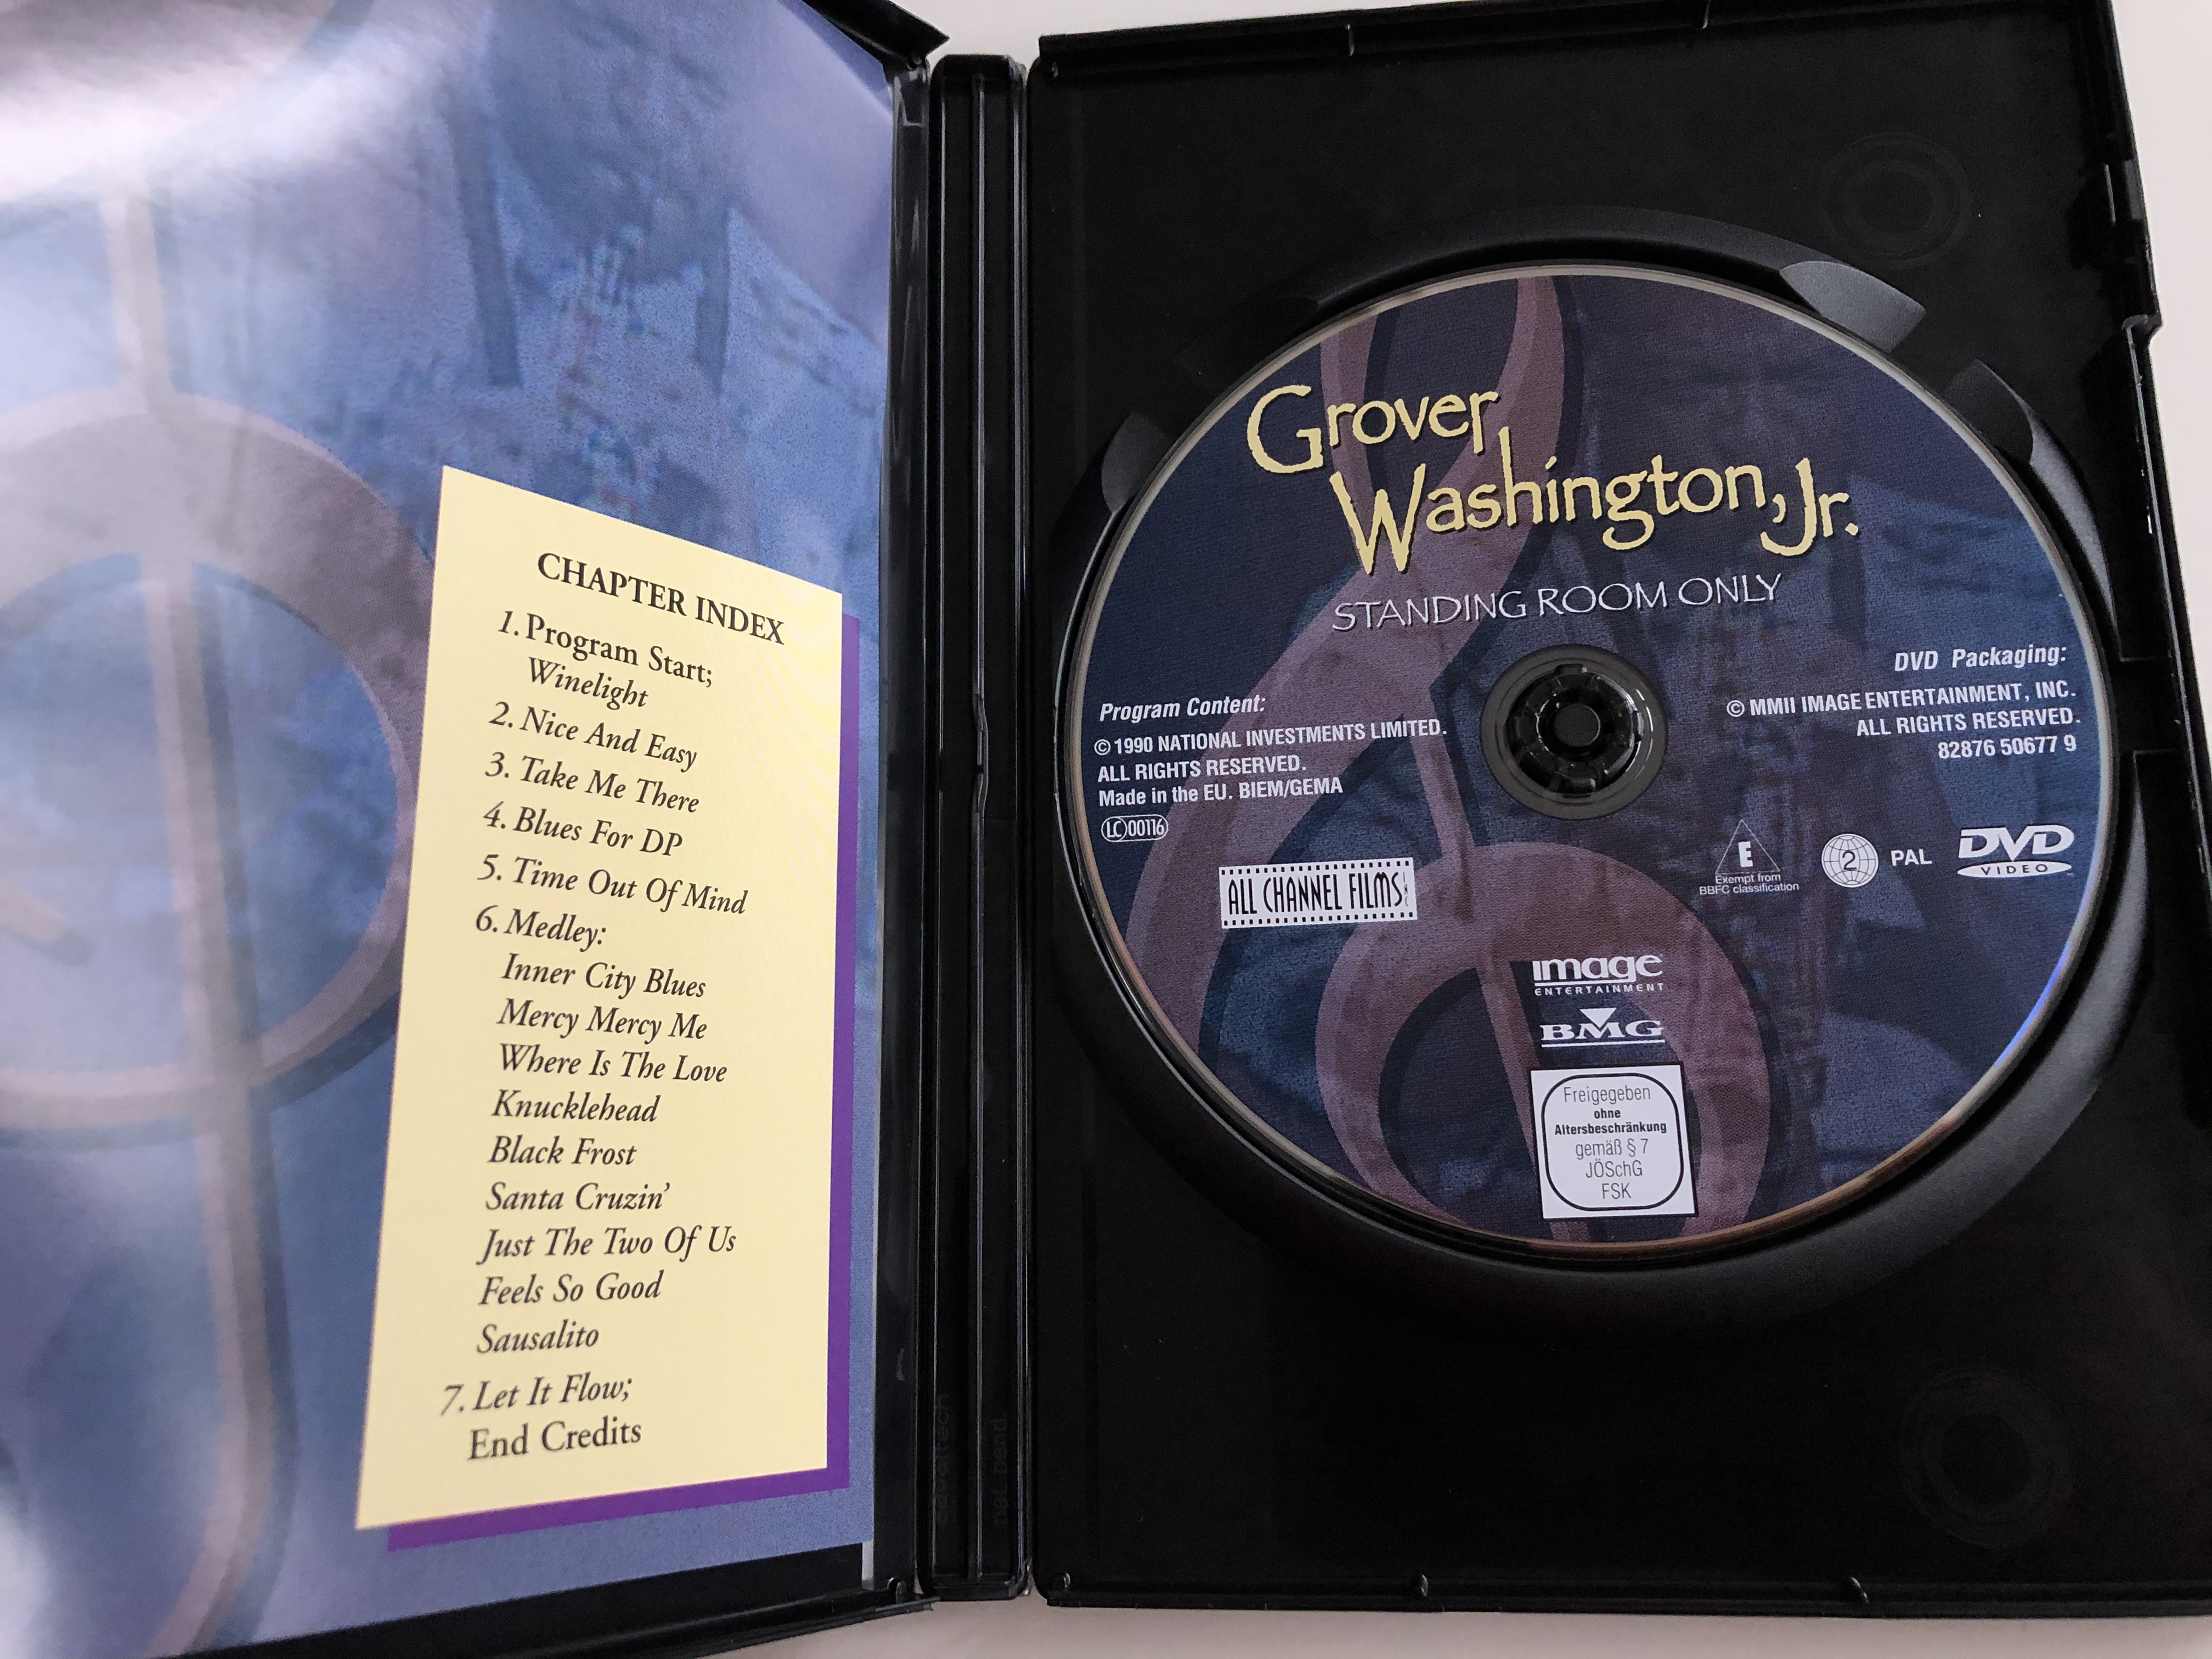 grover-washington-jr.-standing-room-only-dvd-1990-nice-and-easy-take-me-there-time-out-of-mind-2-.jpg